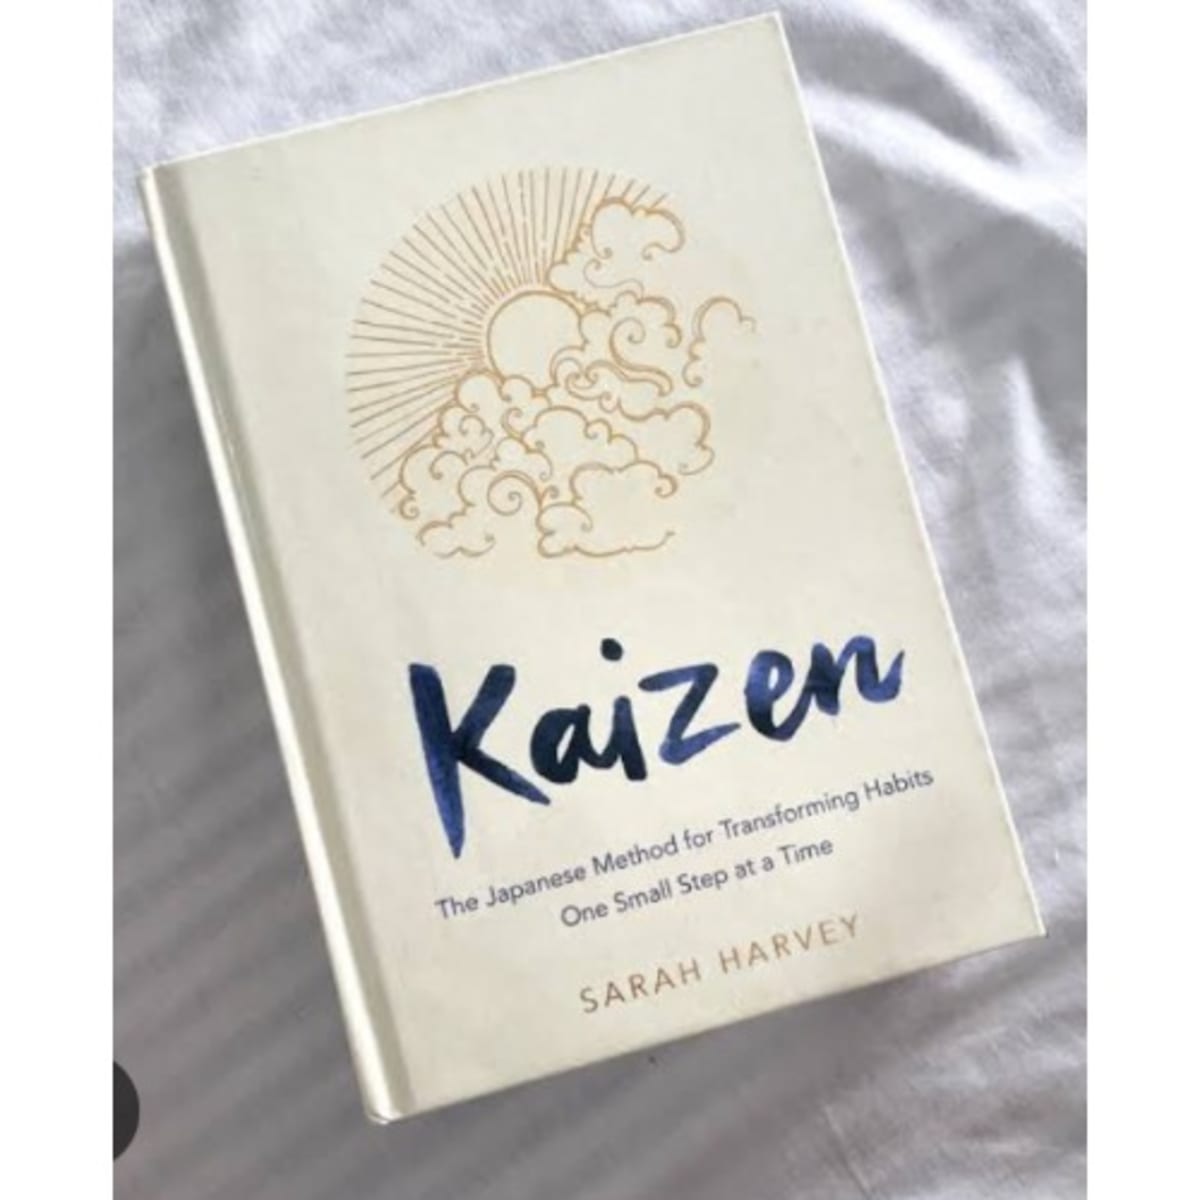 Kaizen: The Japanese Method for Transforming Habits, One Small Step at a  Time